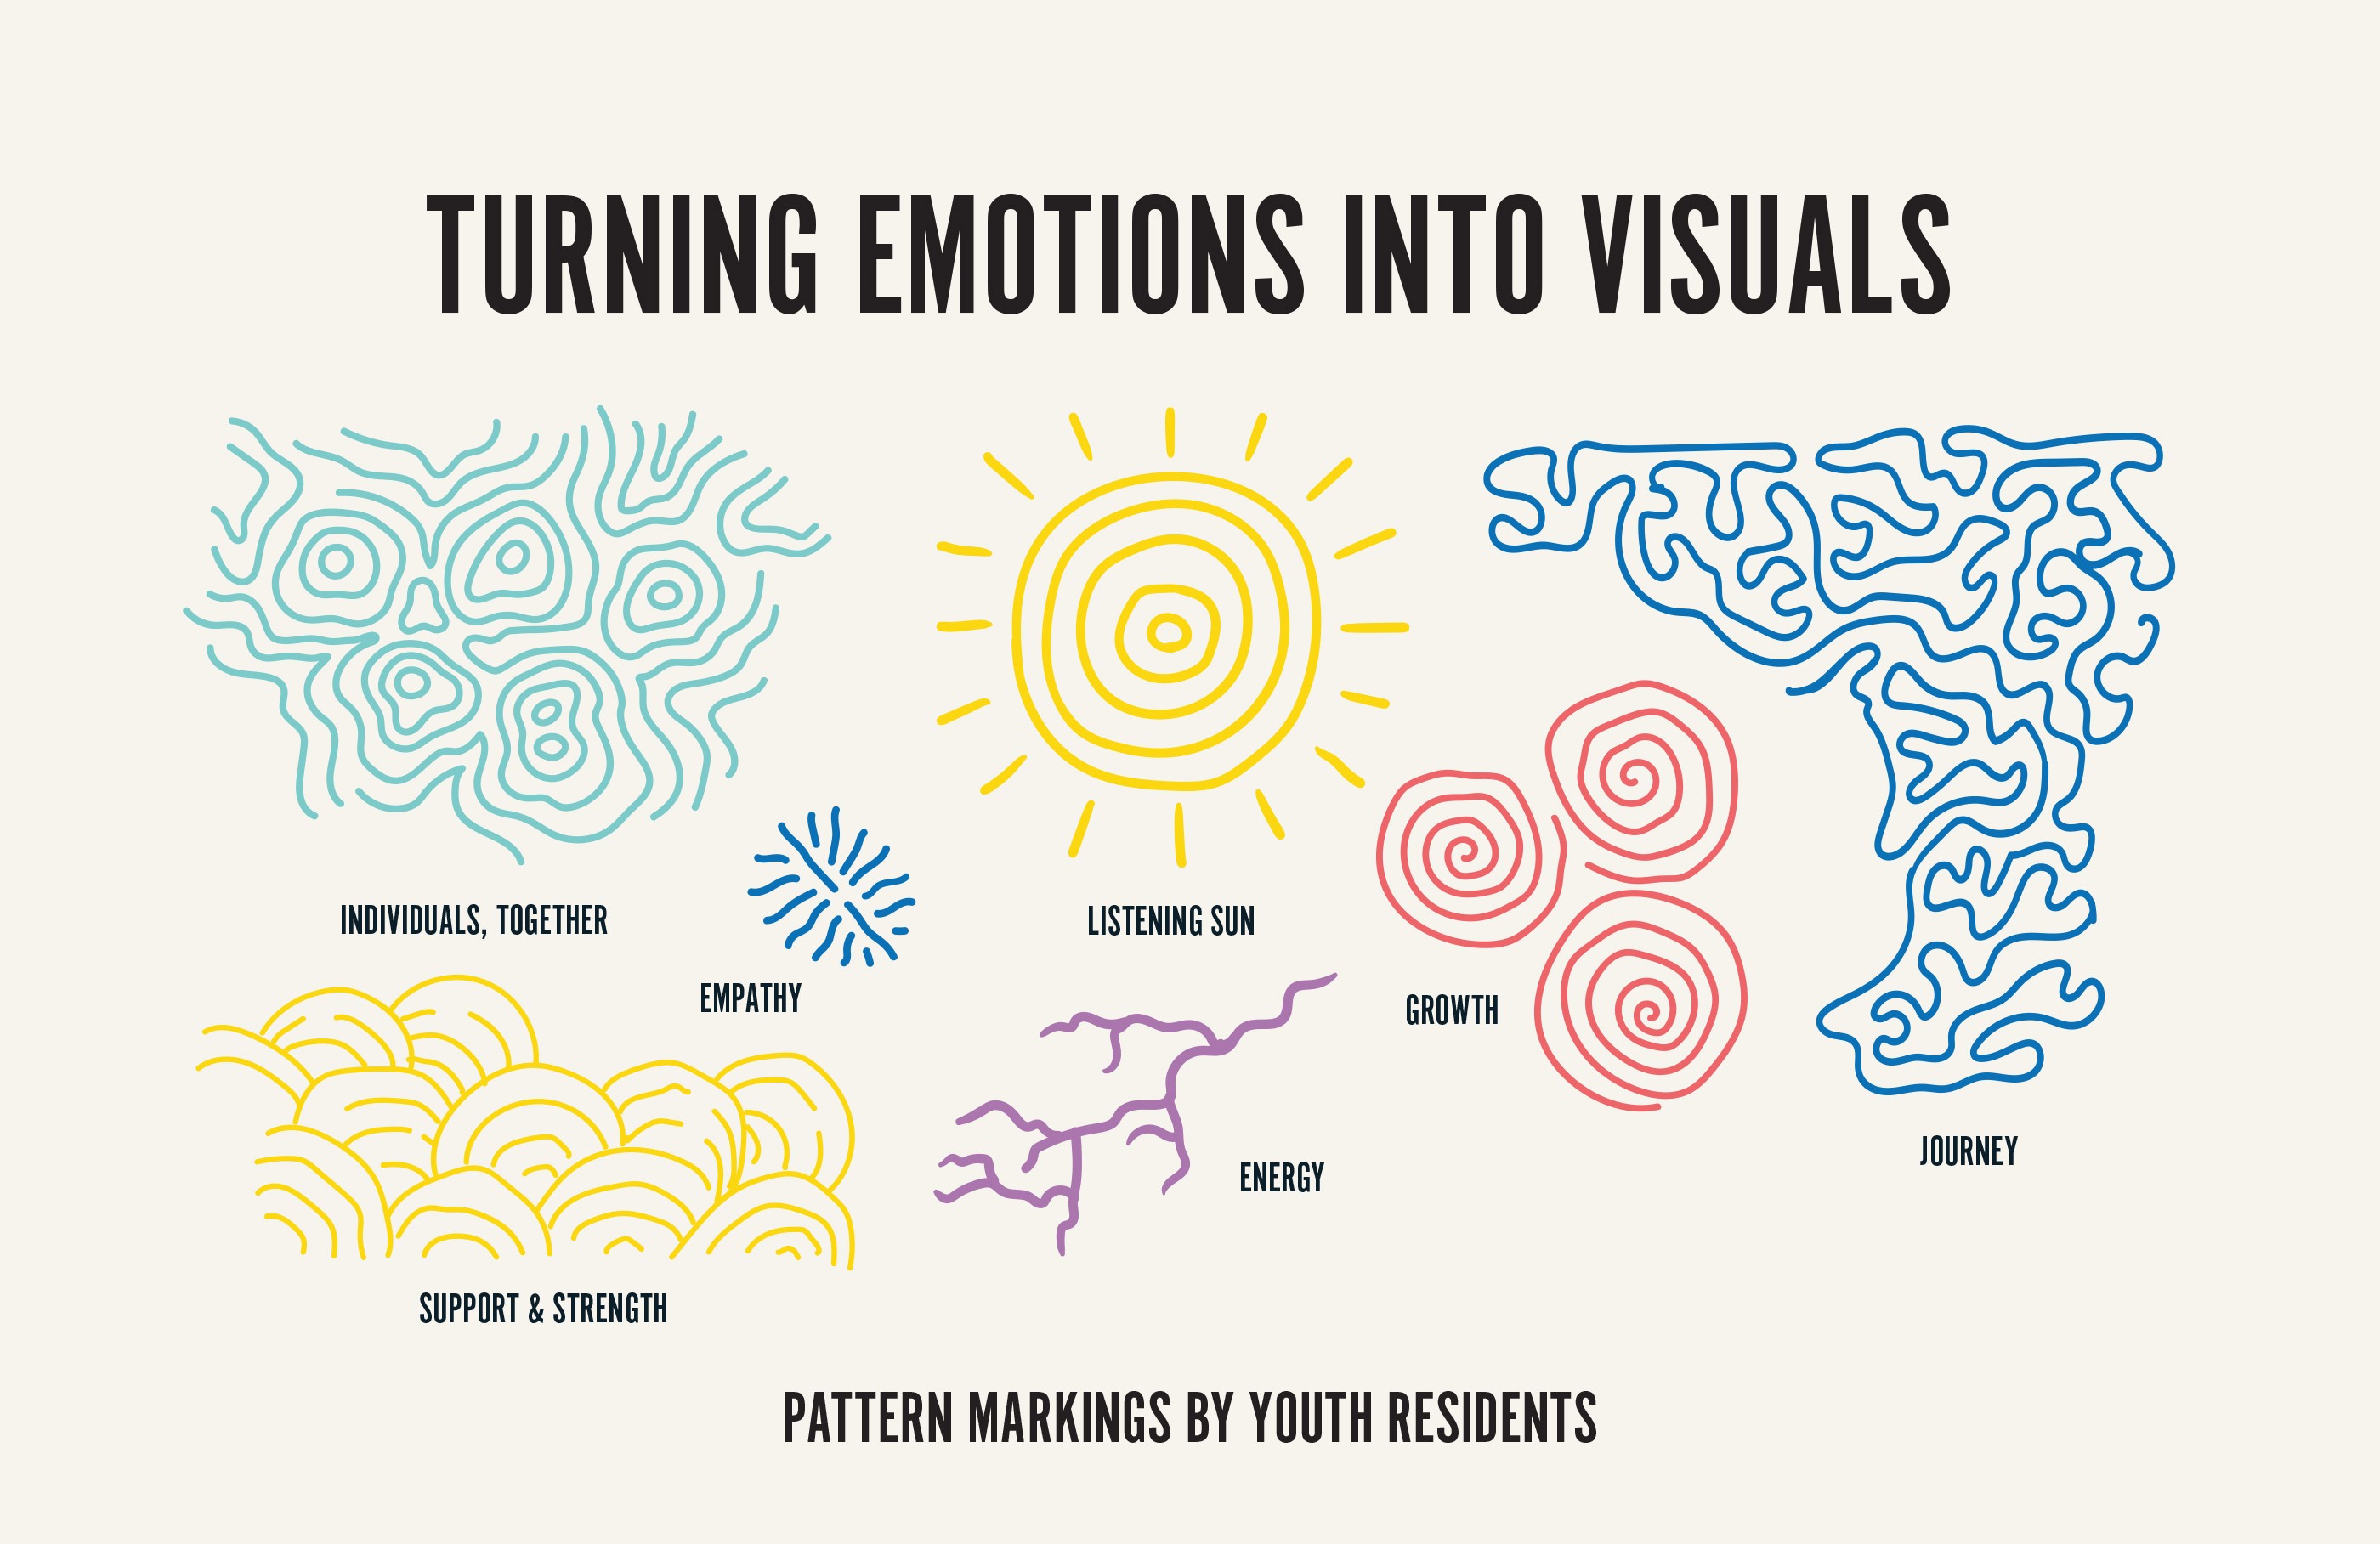 We helped youth residents turn emotions into markings through patternation